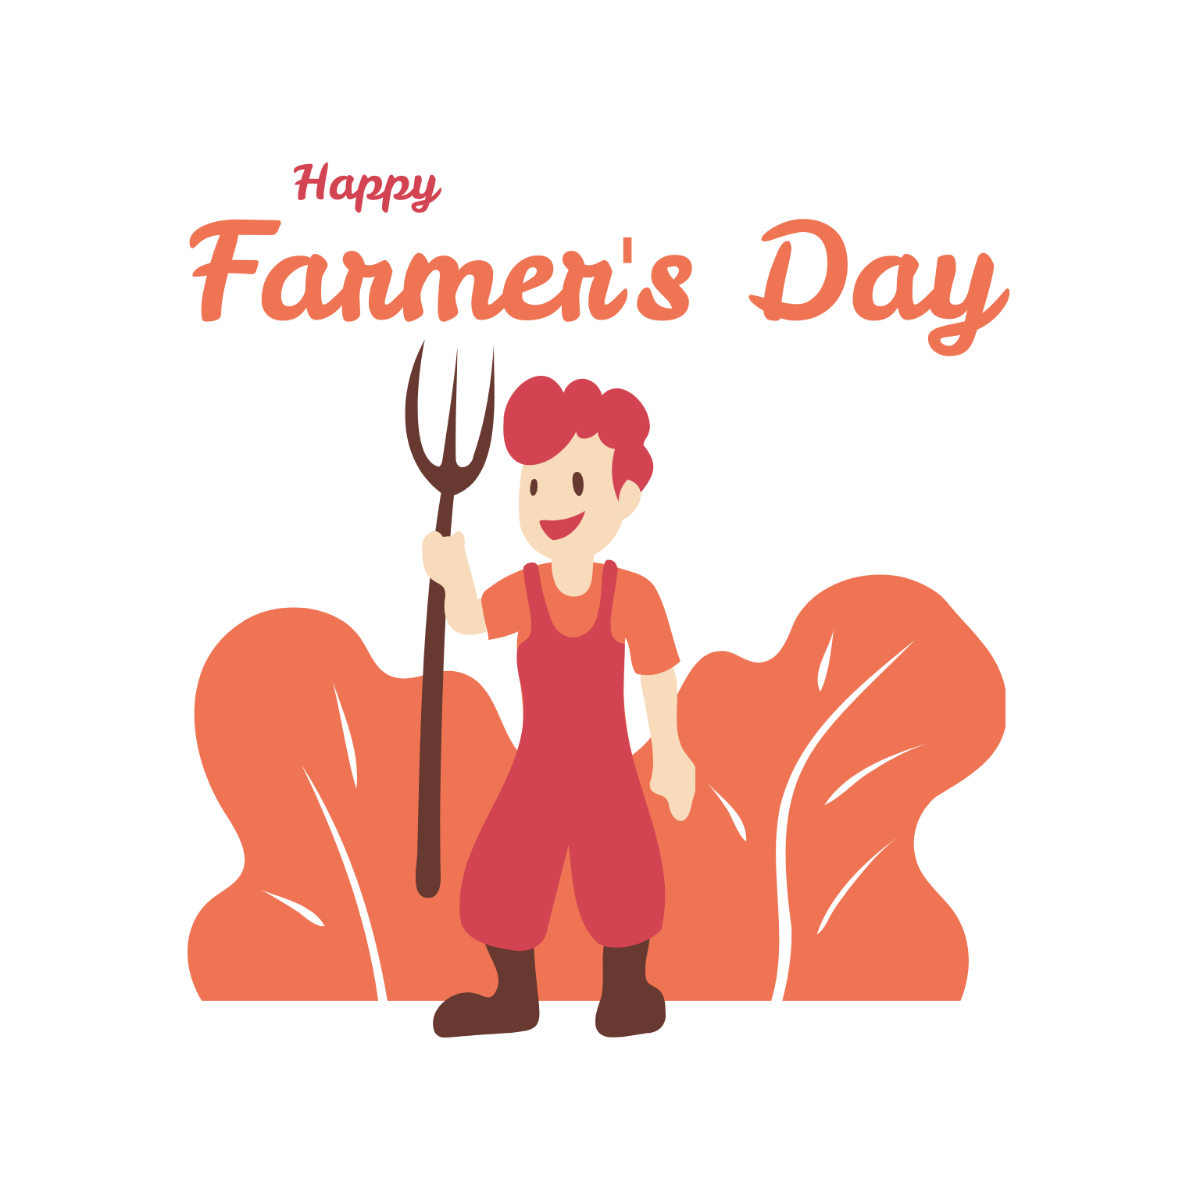 Free Happy Farmers Day Illustration Template